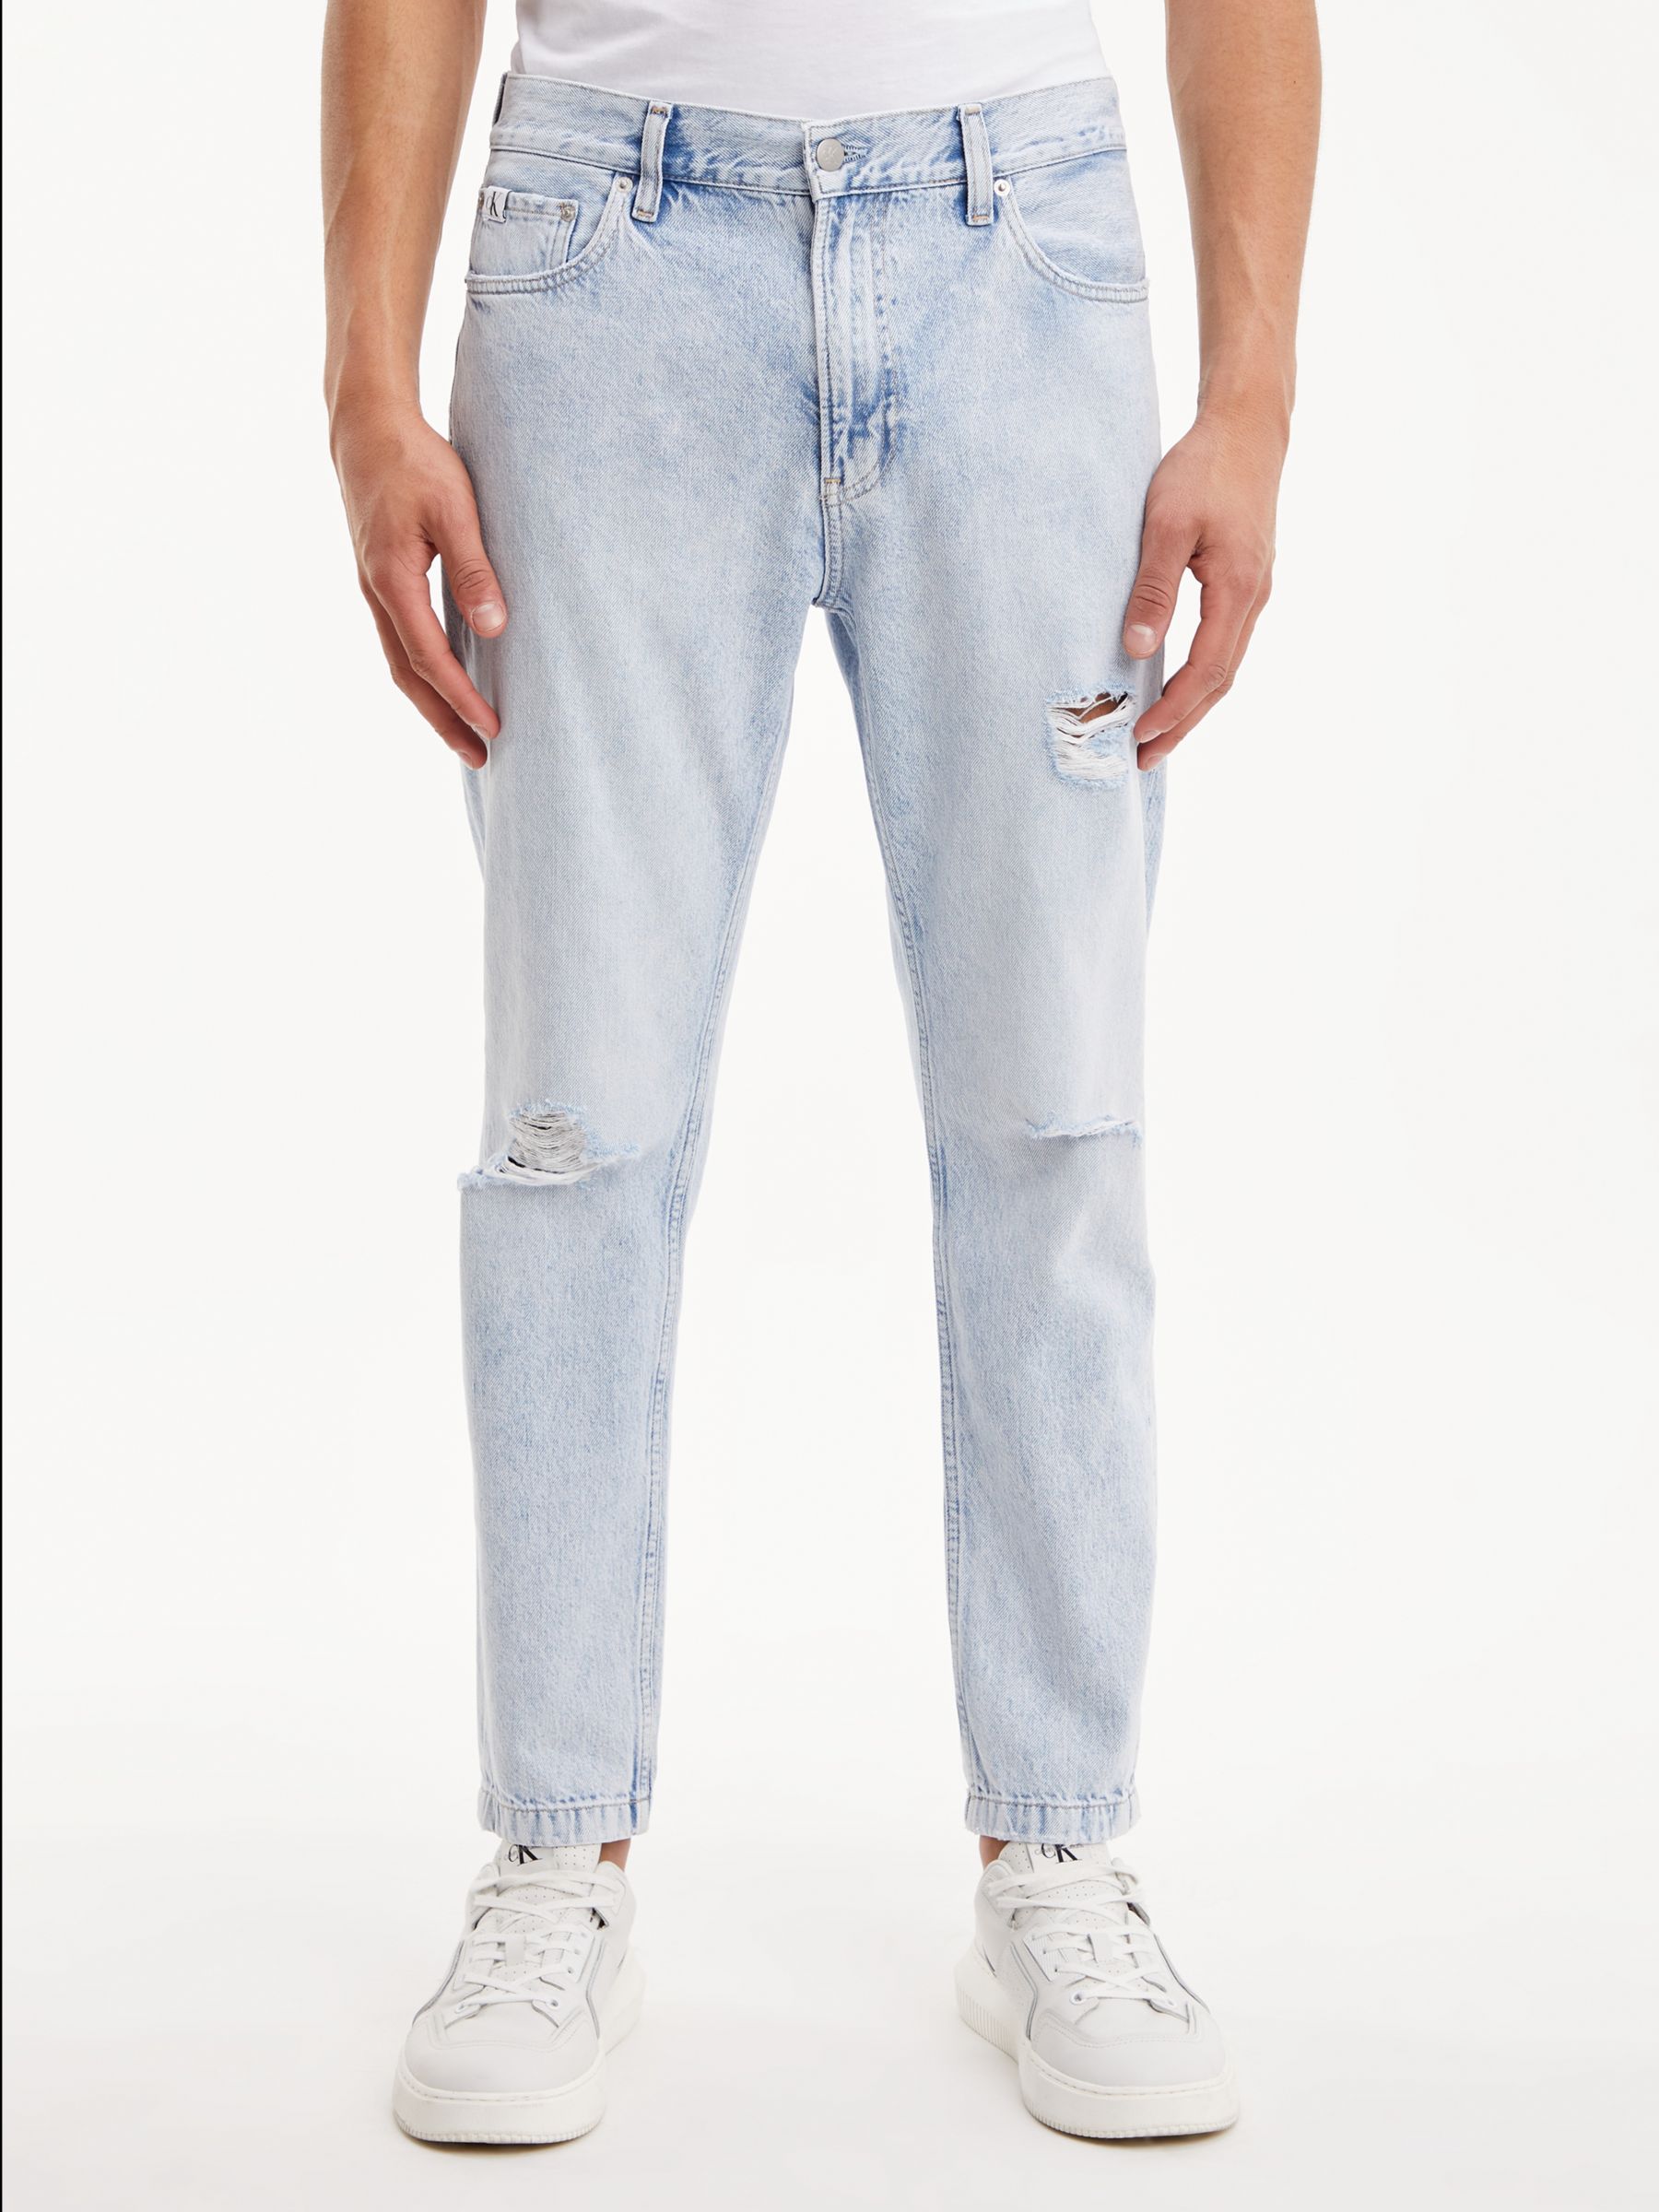 Calvin Klein Jeans DAD FIT BRIGHT BLUE Blue - Free delivery